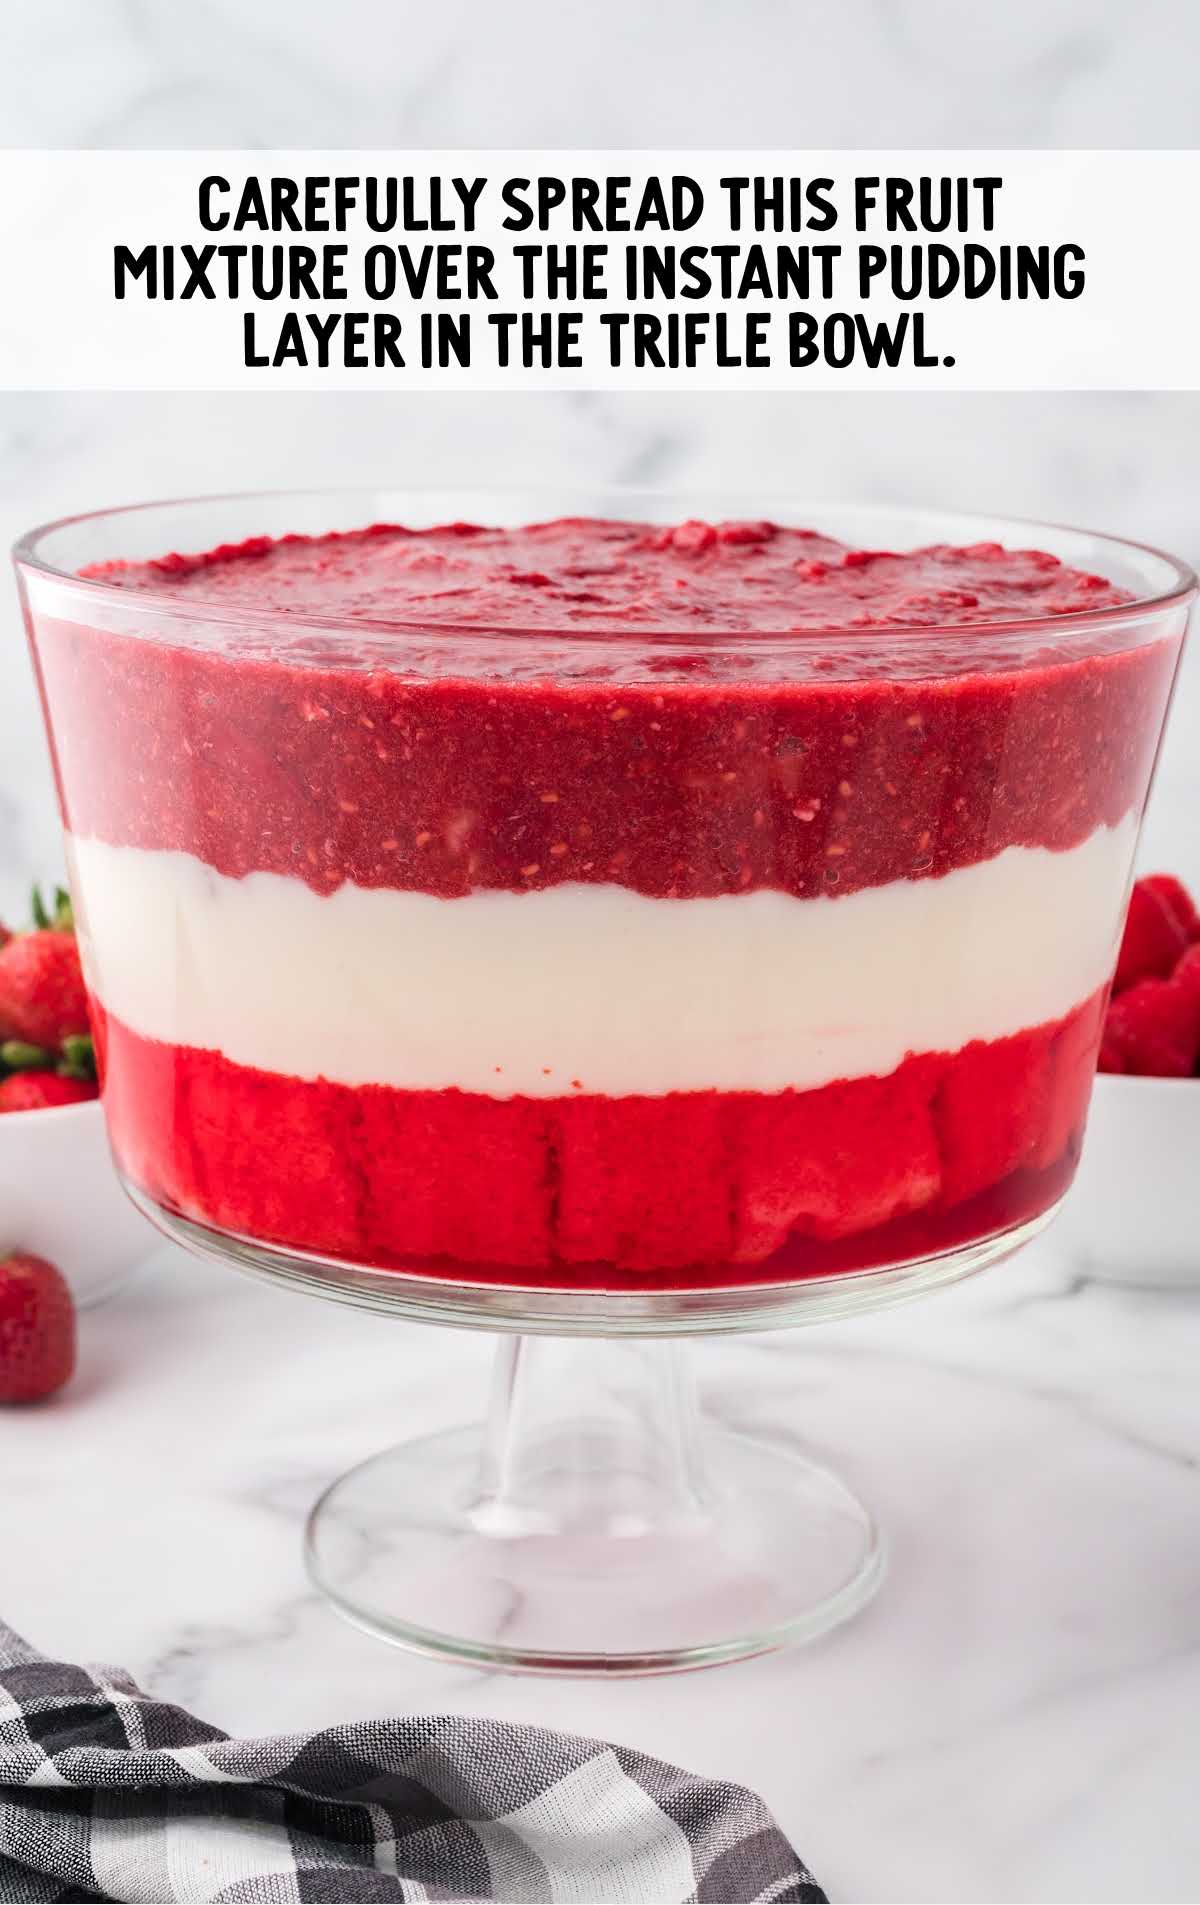 fruit mixture spread over the instant pudding layer in the trifle bowl